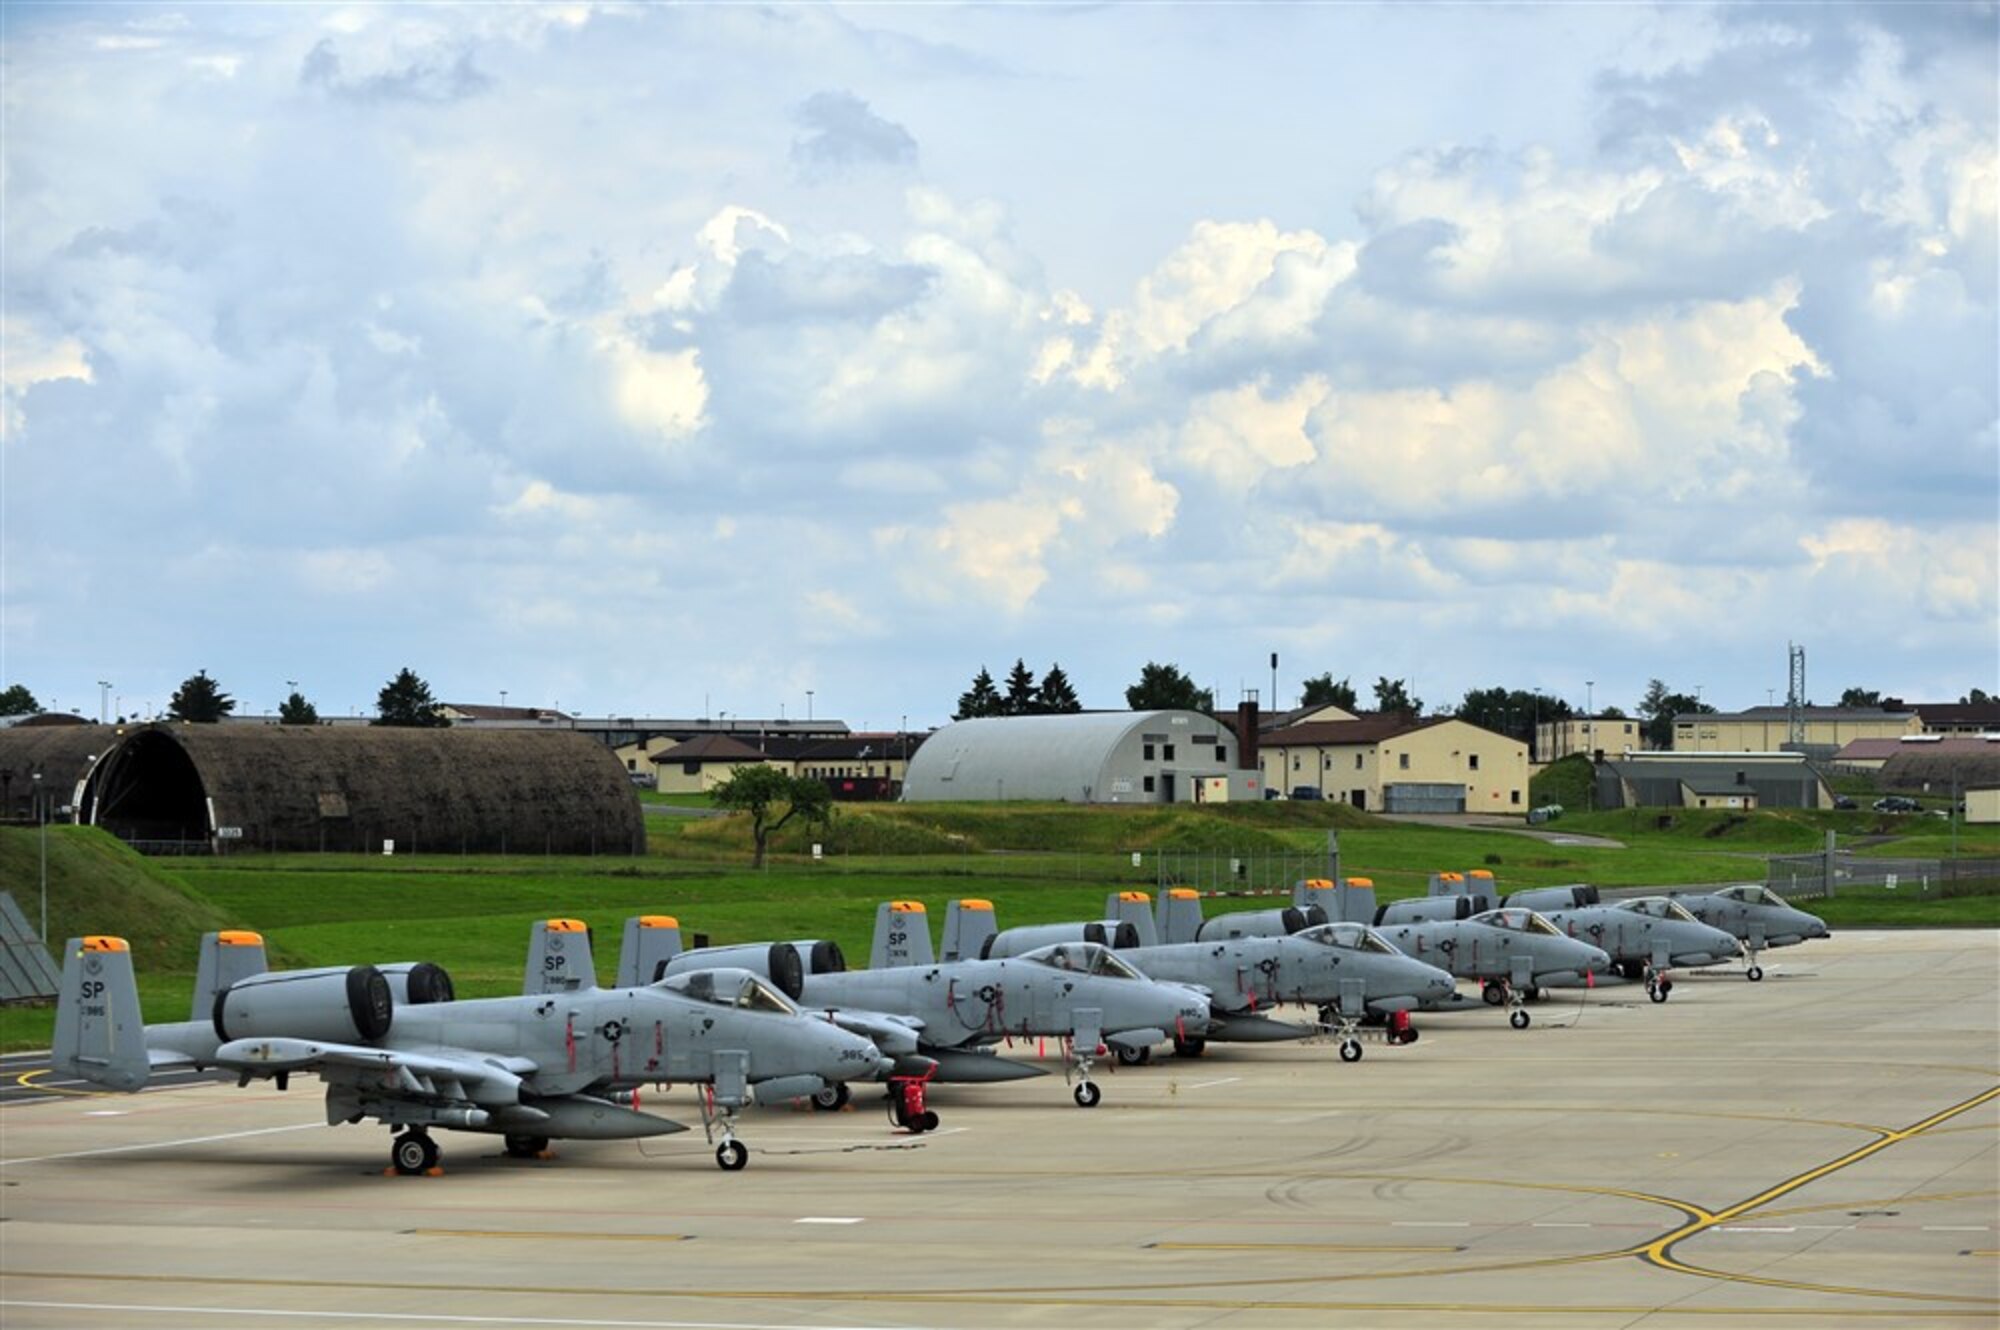 A-10 Thunderbolt II aircraft from the 81st Fighter Squadron wait on Ramp 4 at Spangdahlem Air Base, Germany, July 5. Siemens, an energy service company, is currently completing an investment-grade audit at the base to determine the best opportunities to save energy at the installation. (U.S. Air Force photo/Airman 1st Class Dillon Davis)